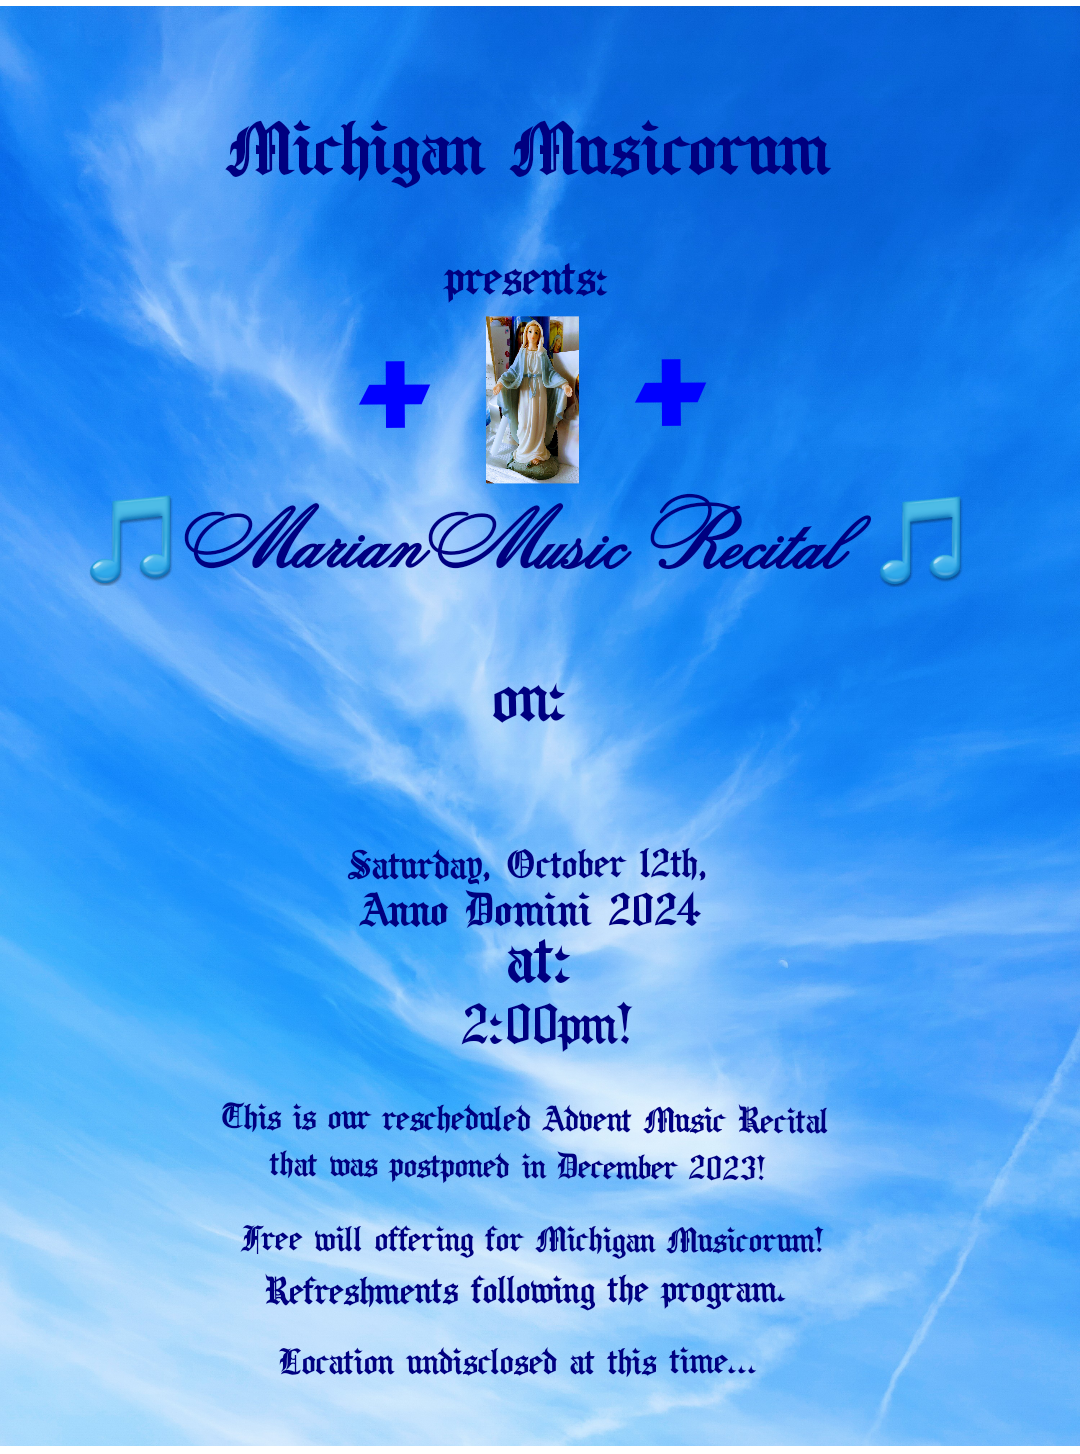 Though Michigan Musicorum's Advent Music Recital has been postponed due to family health issues, it has been rescheduled as our Marian Music Recital on Saturday, October 12th, Anno Domini 2024, during the month of the Most Holy Rosary!  We are very excited about this announcement!  Please refer to our ad flyer above for more details!  Image by: Ronald L. Hirchberger, Jr., michiganmusicorum.weebly.com.